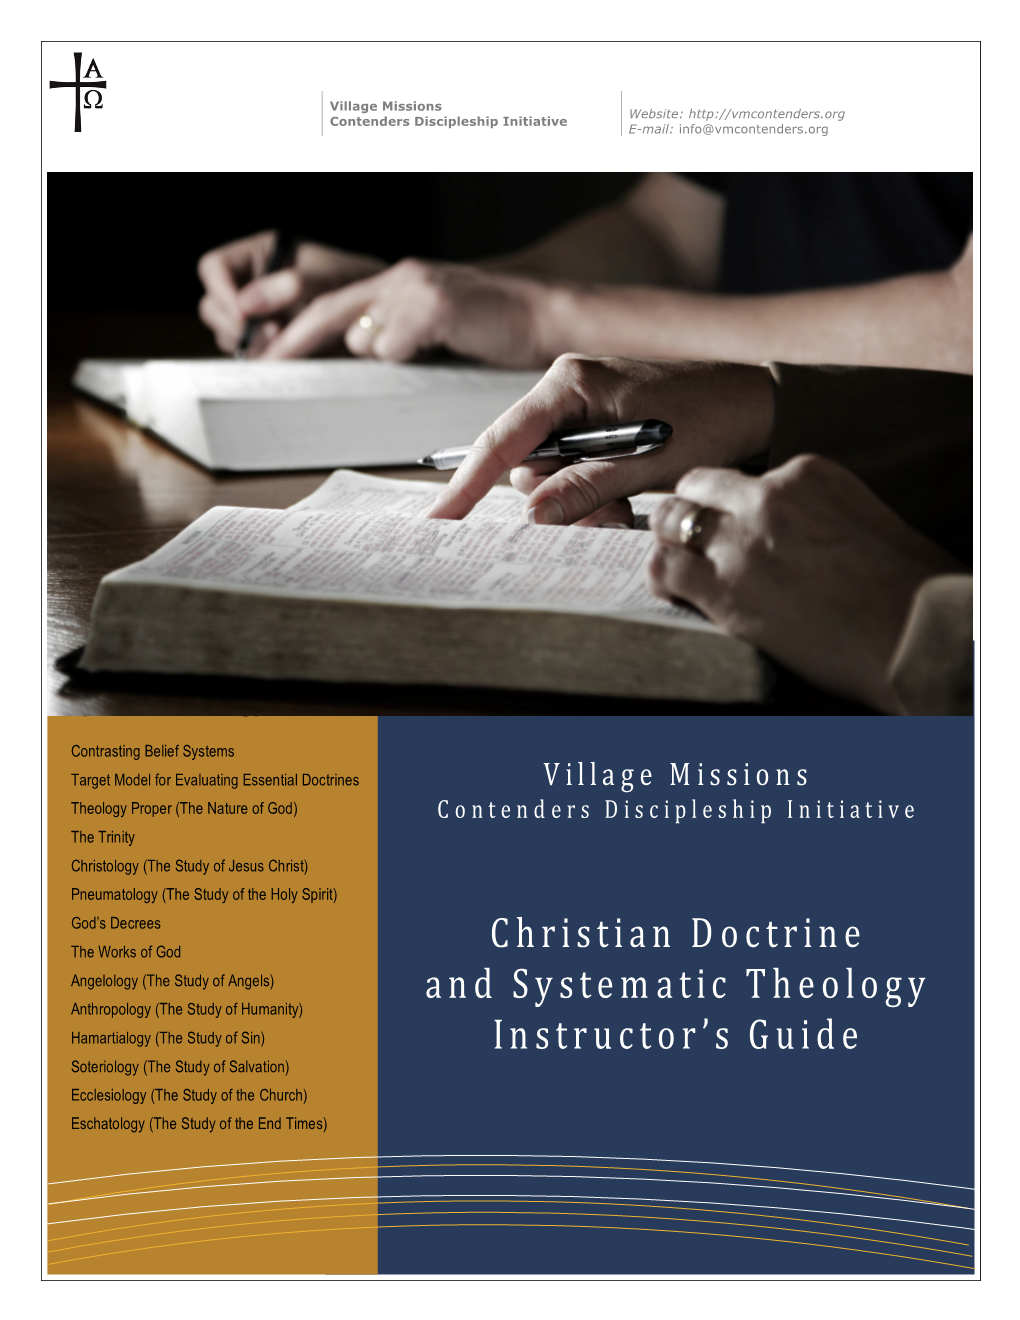 Christian Doctrine Systematic Theology